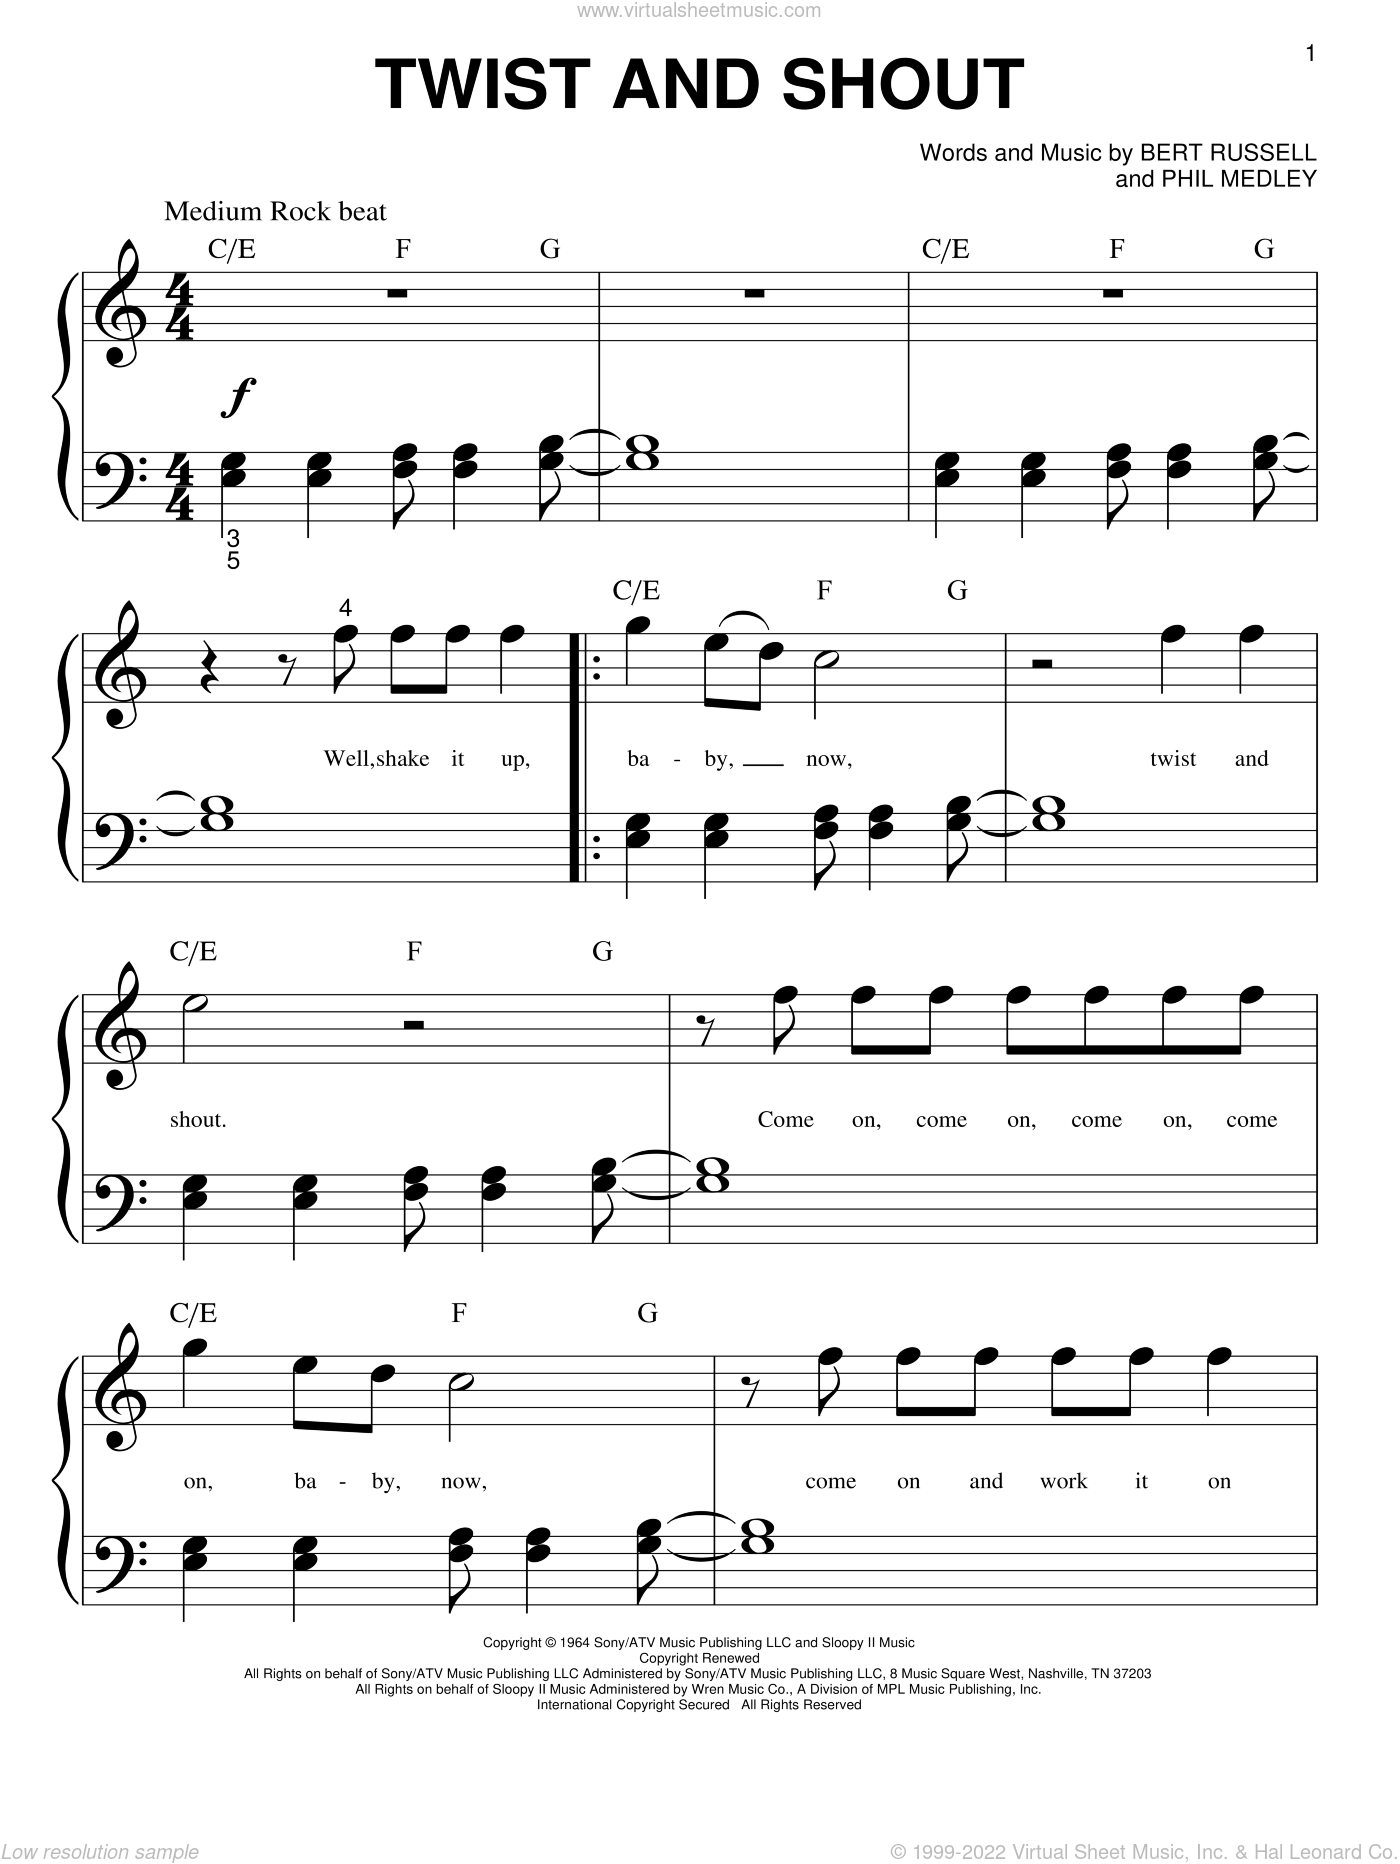 https://cdn3.virtualsheetmusic.com/images/first_pages/HL/HL-24575First_BIG_1.png